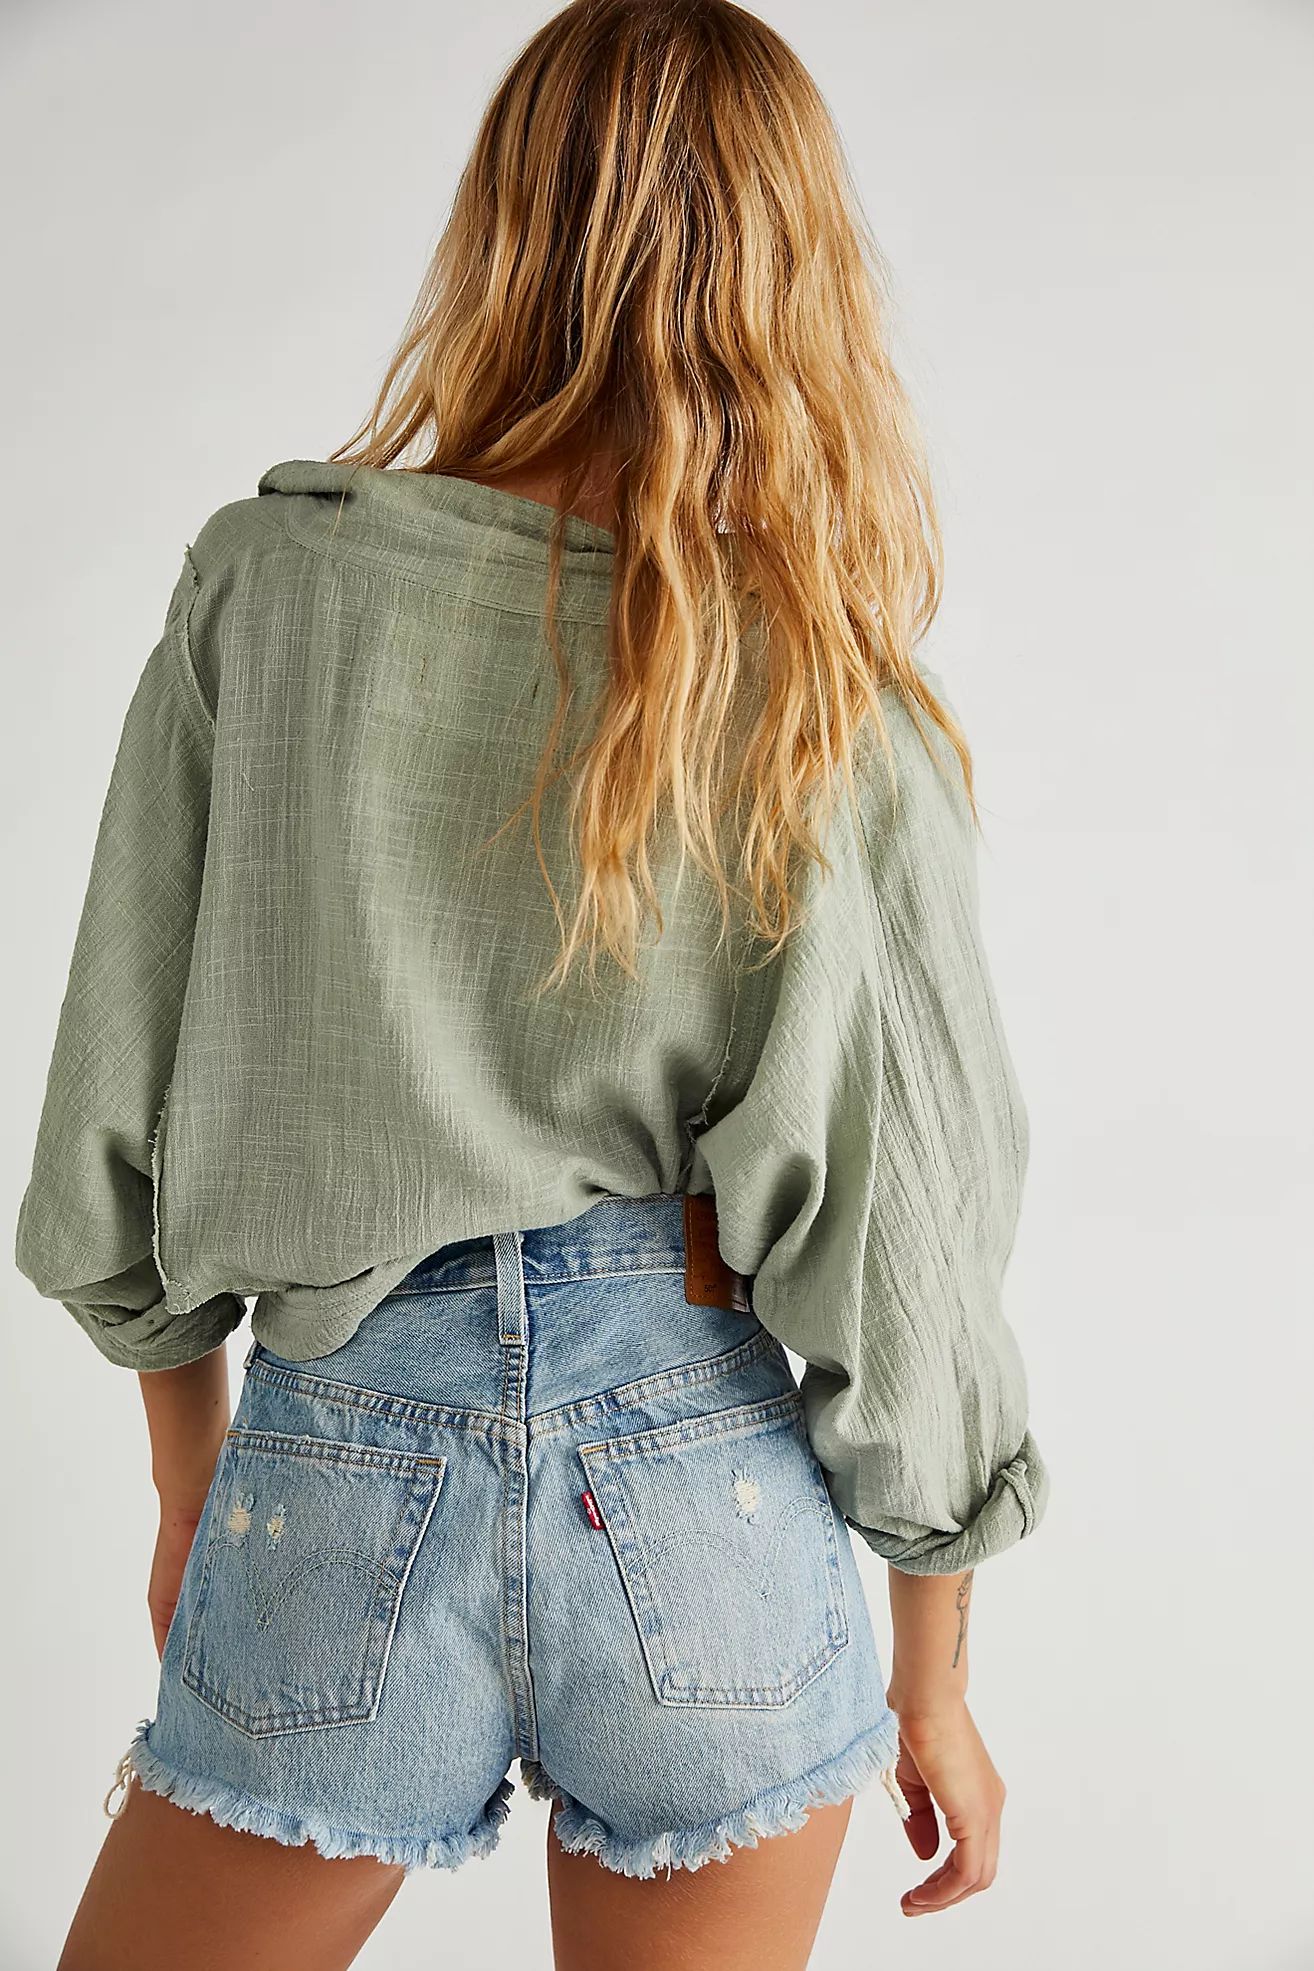 Levi’s 501 High-Rise Denim Shorts | Free People (Global - UK&FR Excluded)